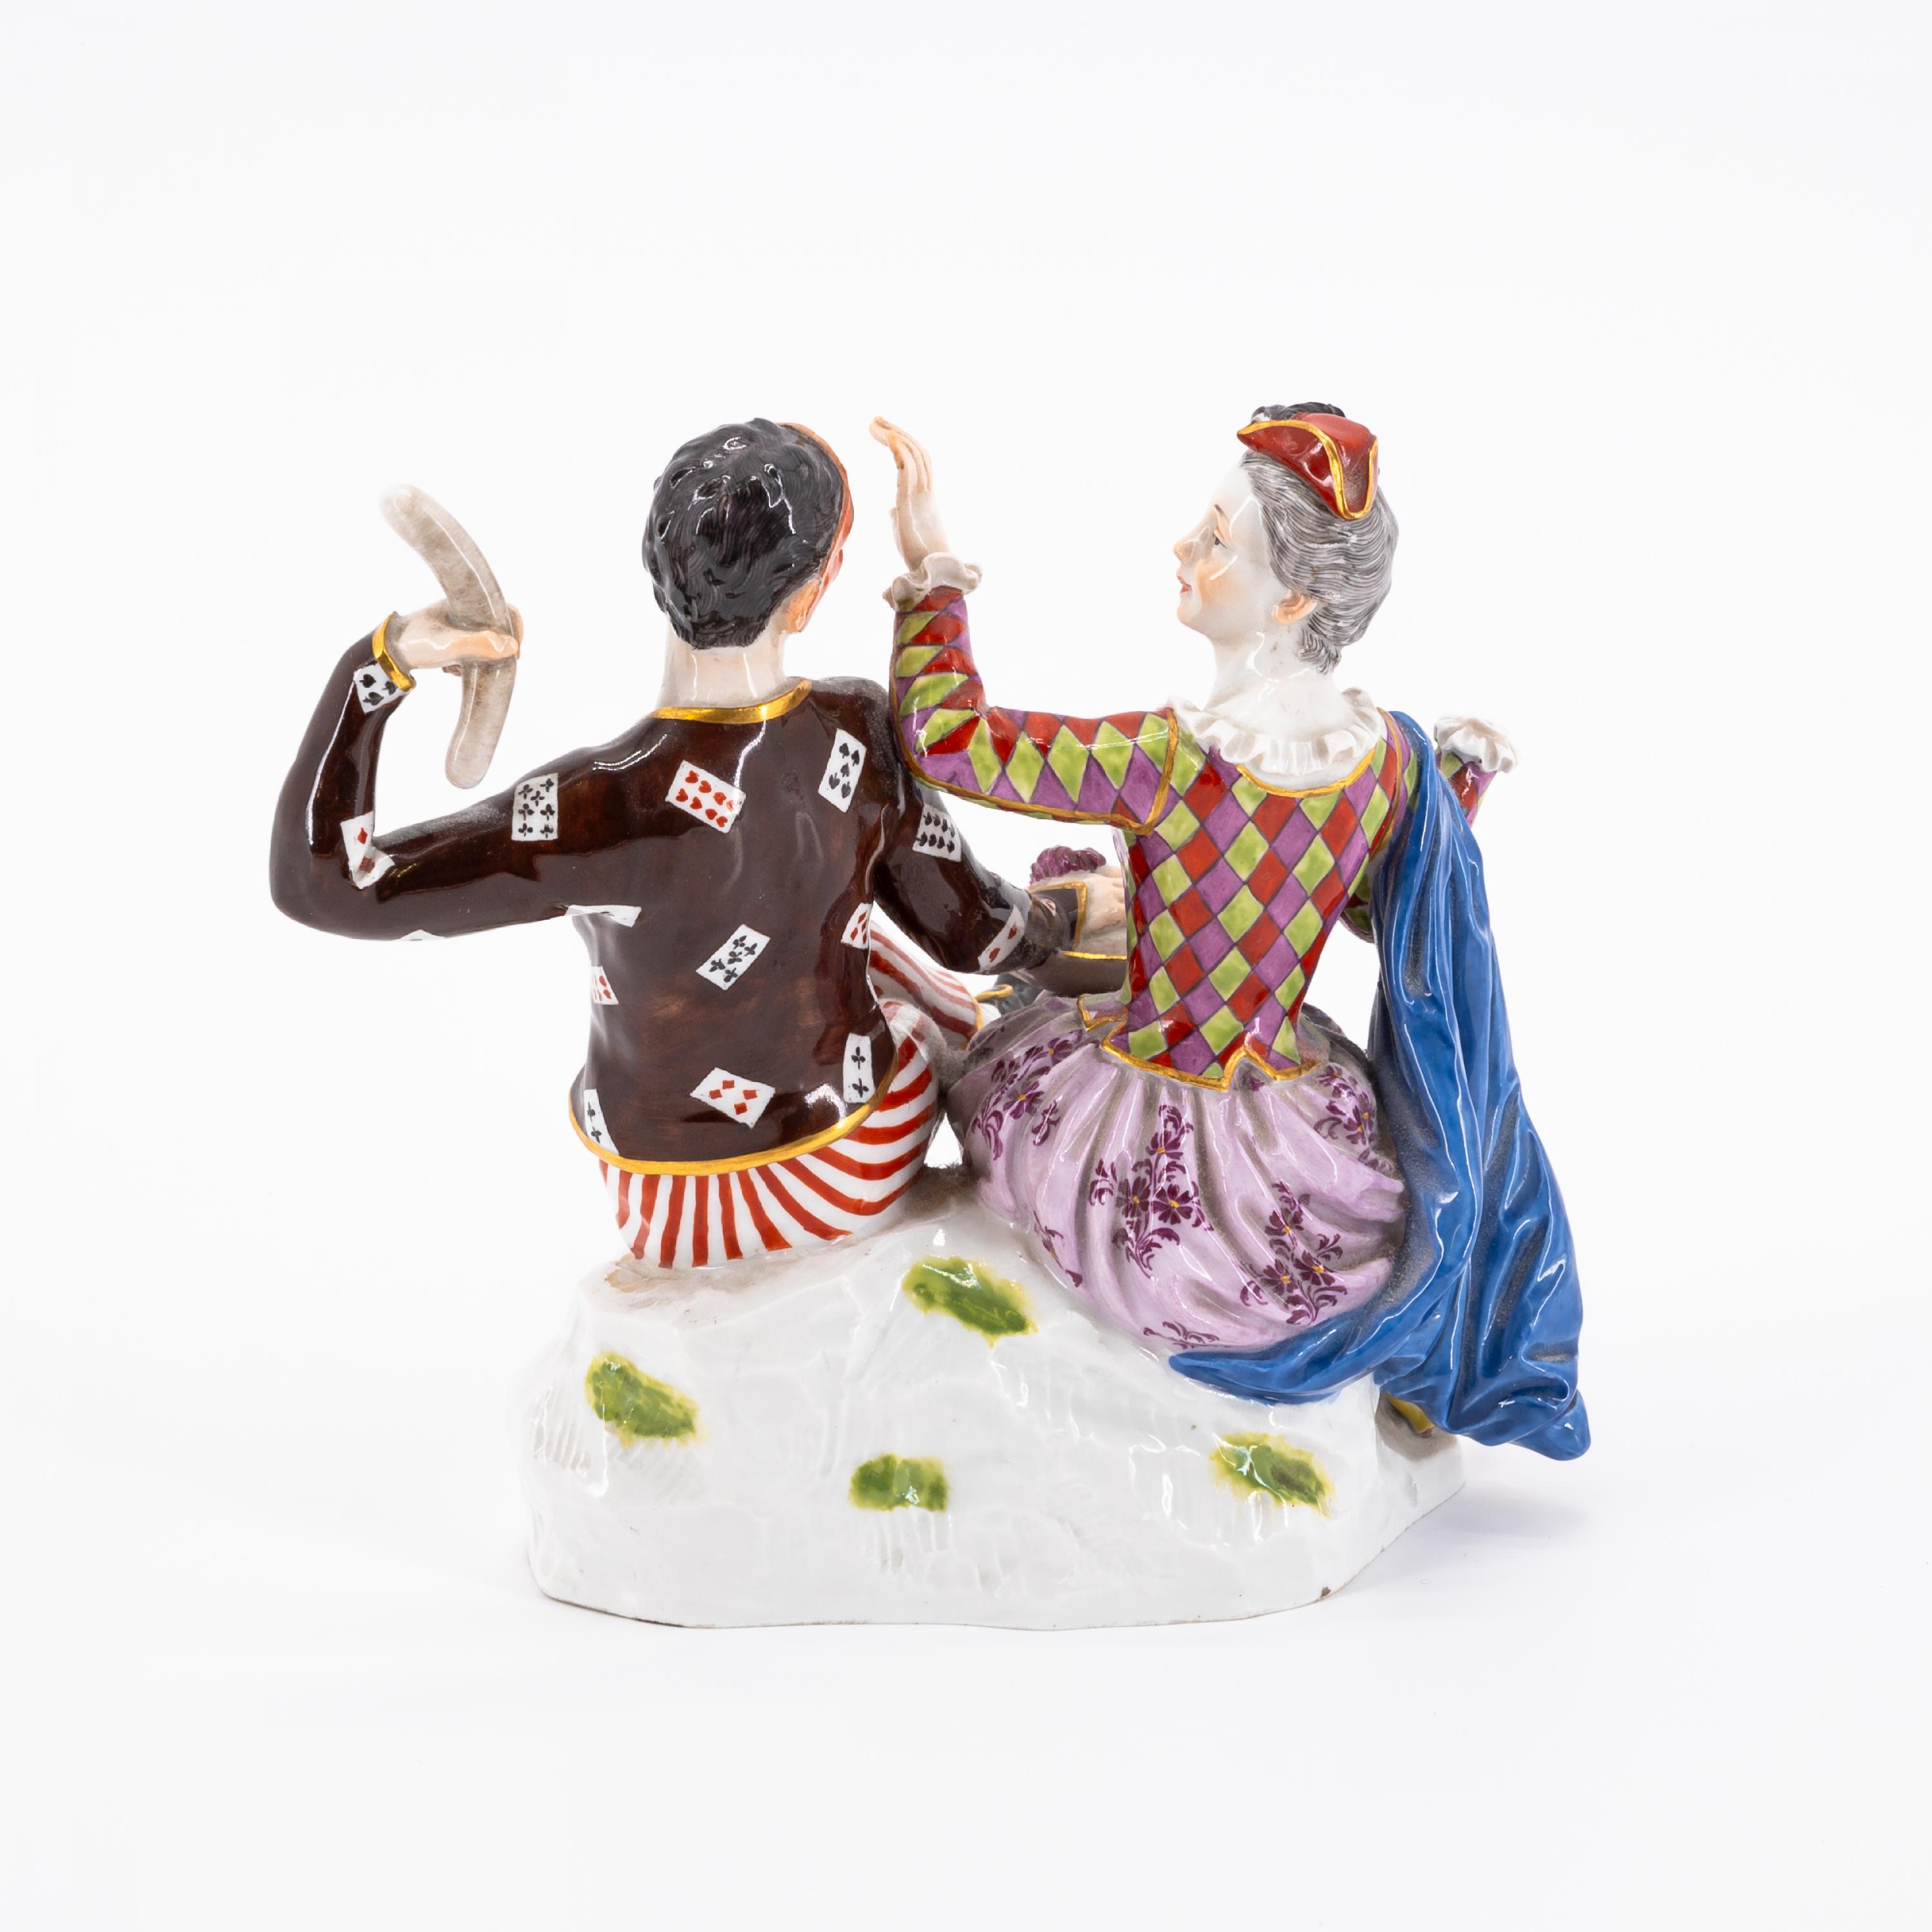 PORCELAIN PAIR OF FIGURES FORM THE 'COMMEDIA DELL'ARTE' - Image 3 of 5